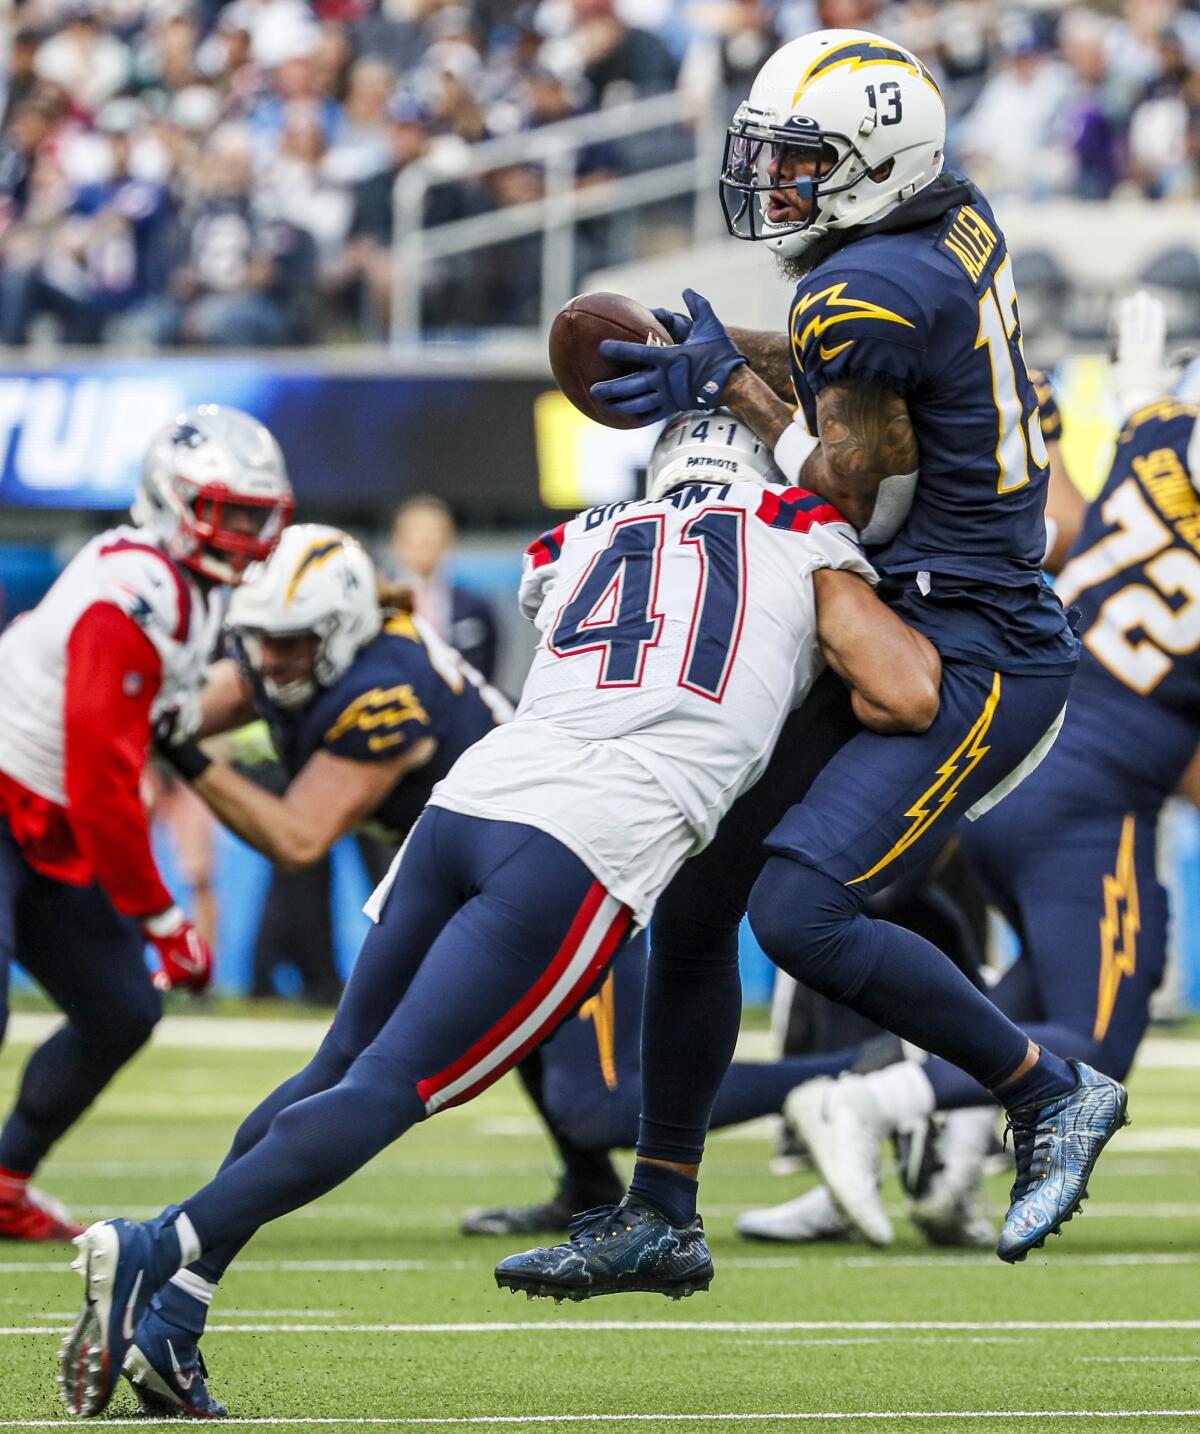 Chargers wide receiver Keenan Allen (13) is separated from the ball by  Patriots cornerback Myles Bryant (41).